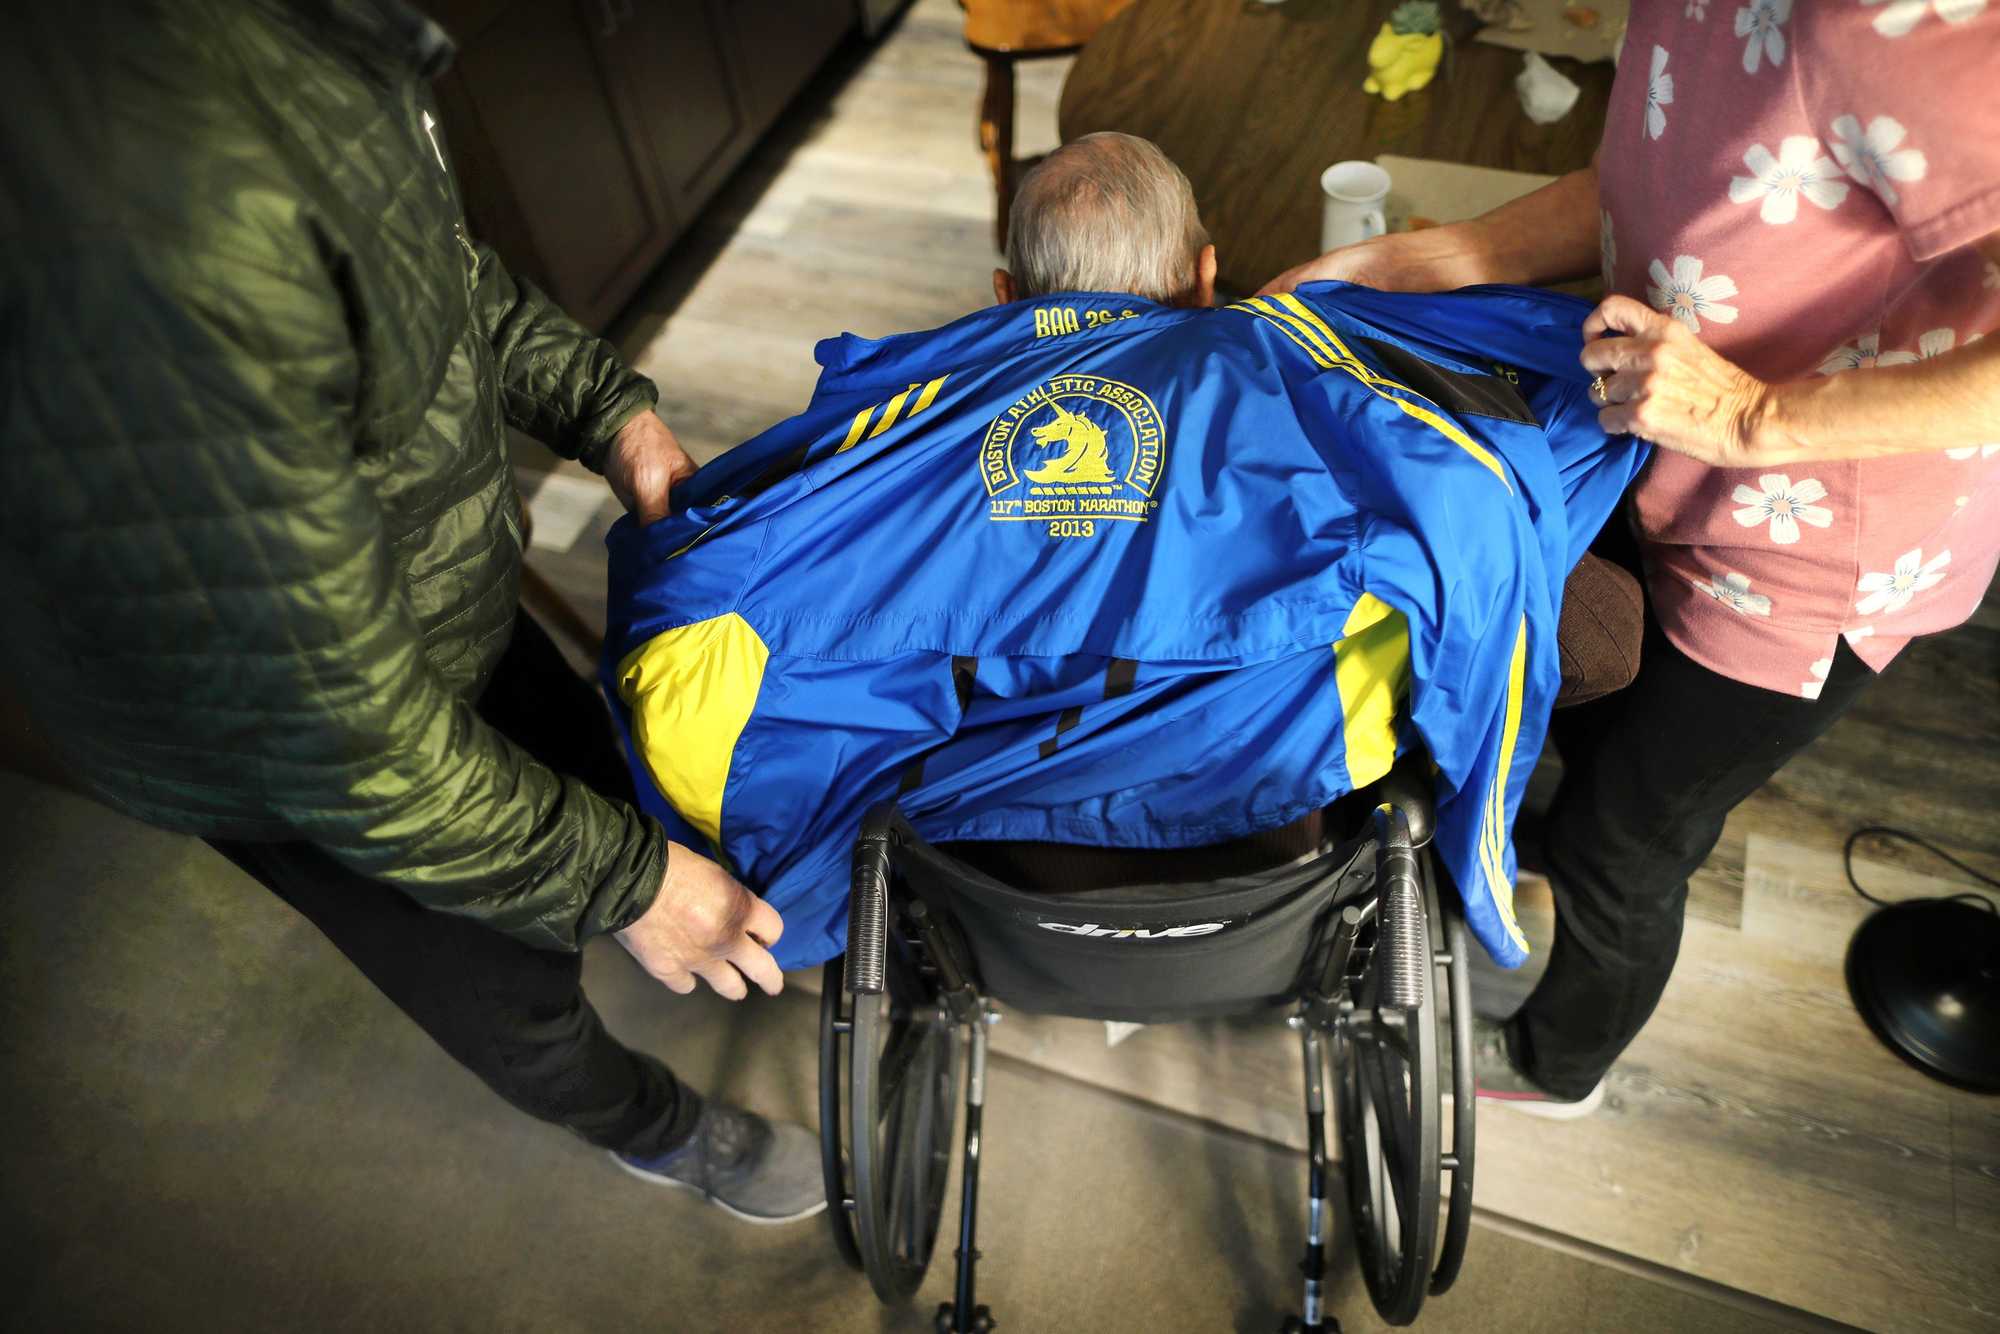 Boston Marathon veteran Bill Iffrig got help with his jacket from his son Mark and daughter Susan at Fieldstone Memory Care as they prepared to go outside. He has worn it all the time for the last 10 years.